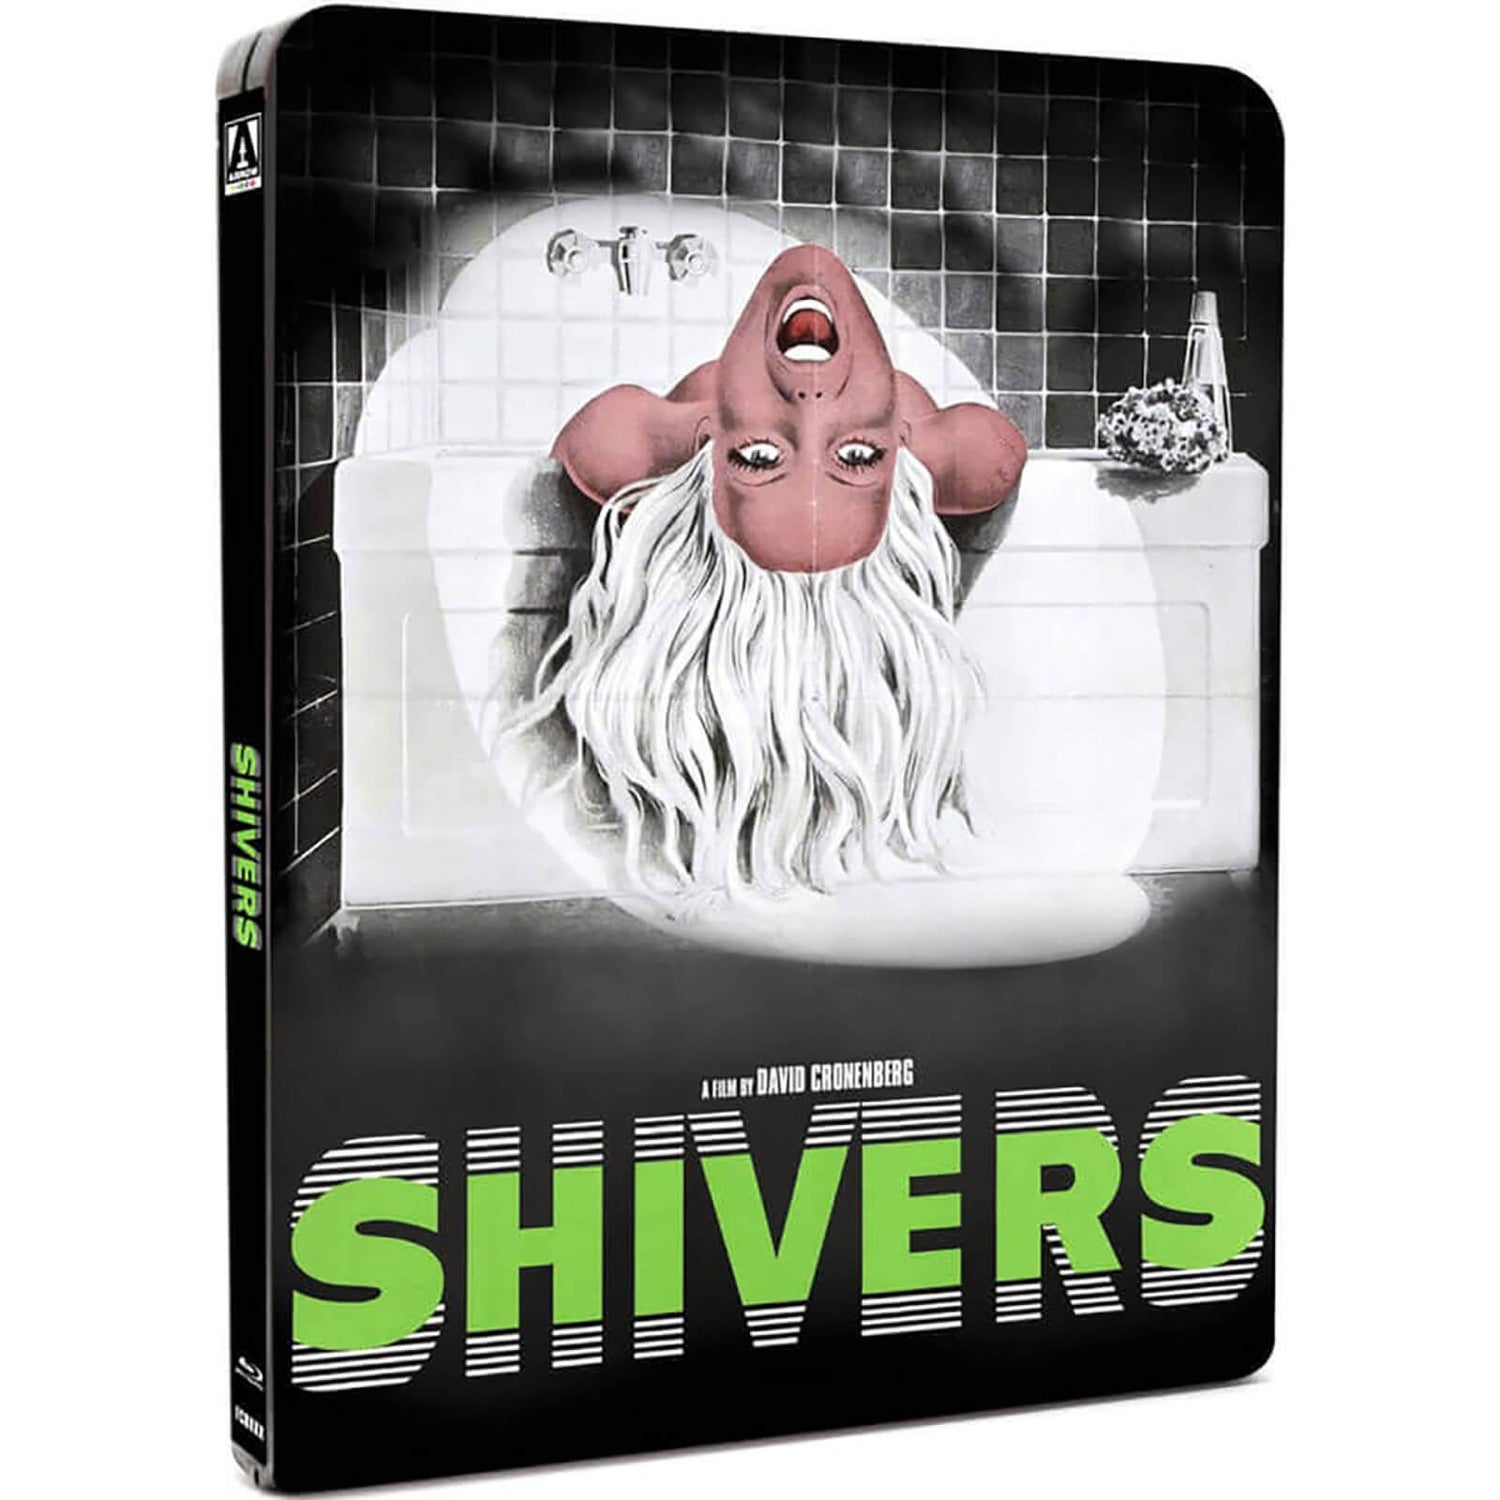 Shivers - Steelbook Edition (Includes DVD)